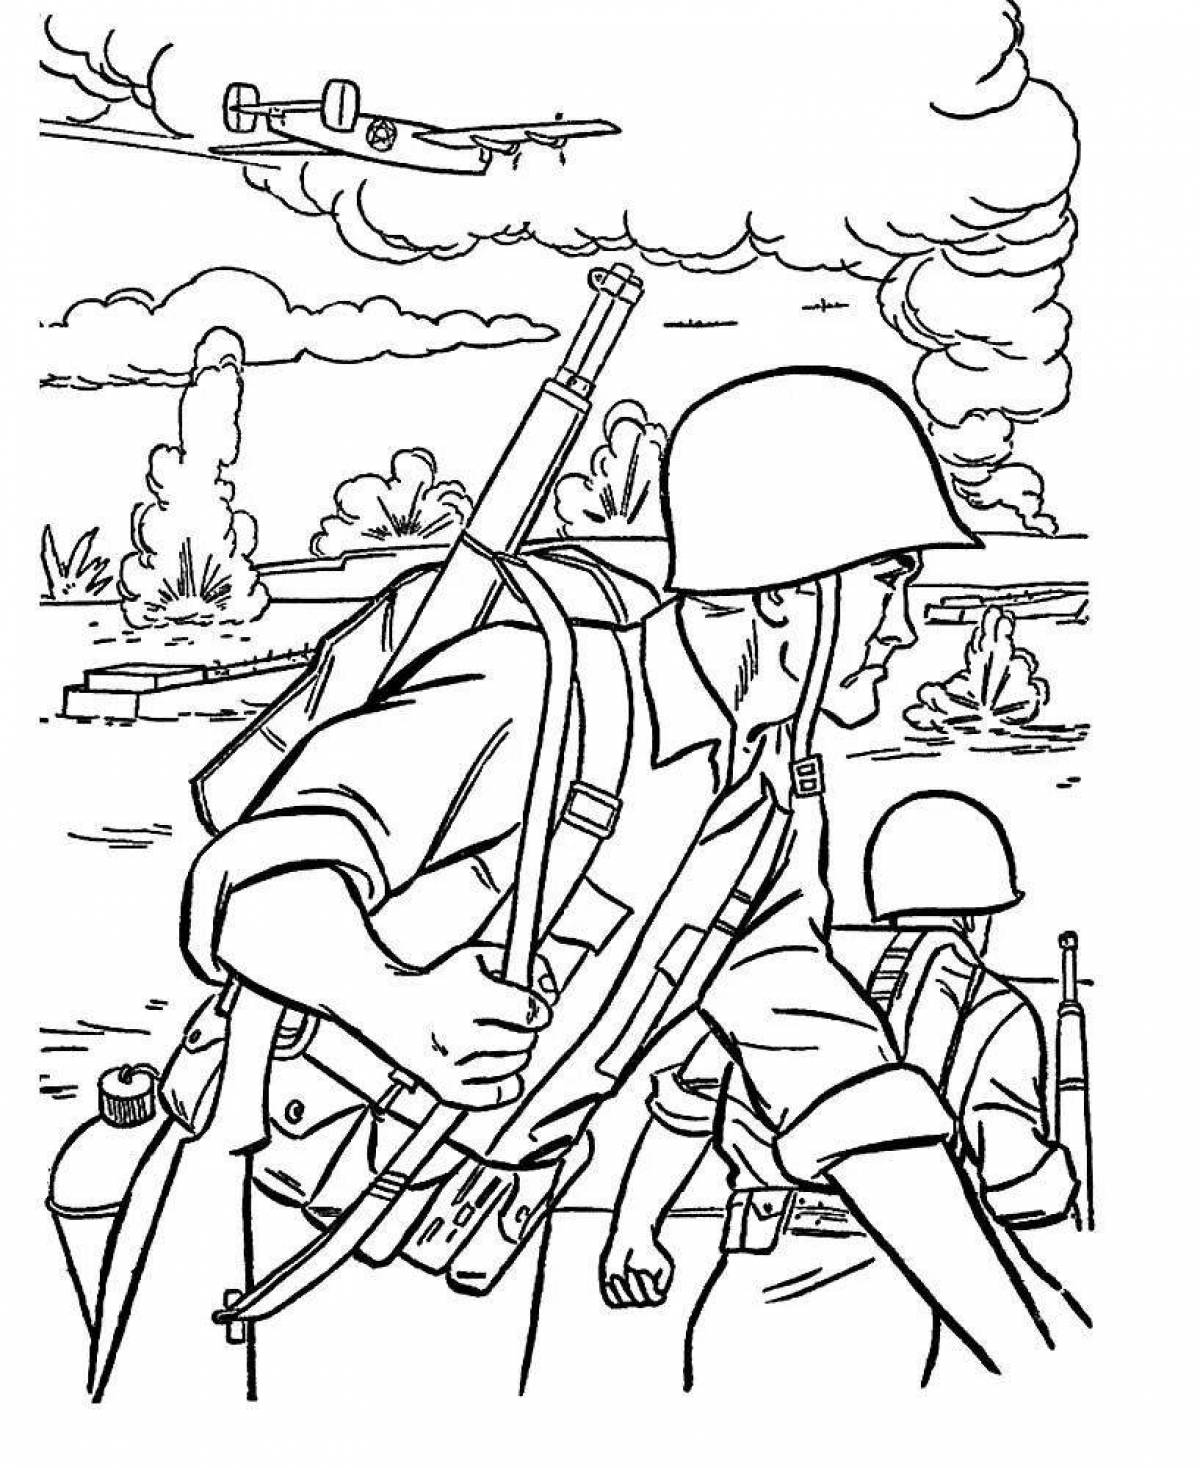 Glorious army coloring book for kids